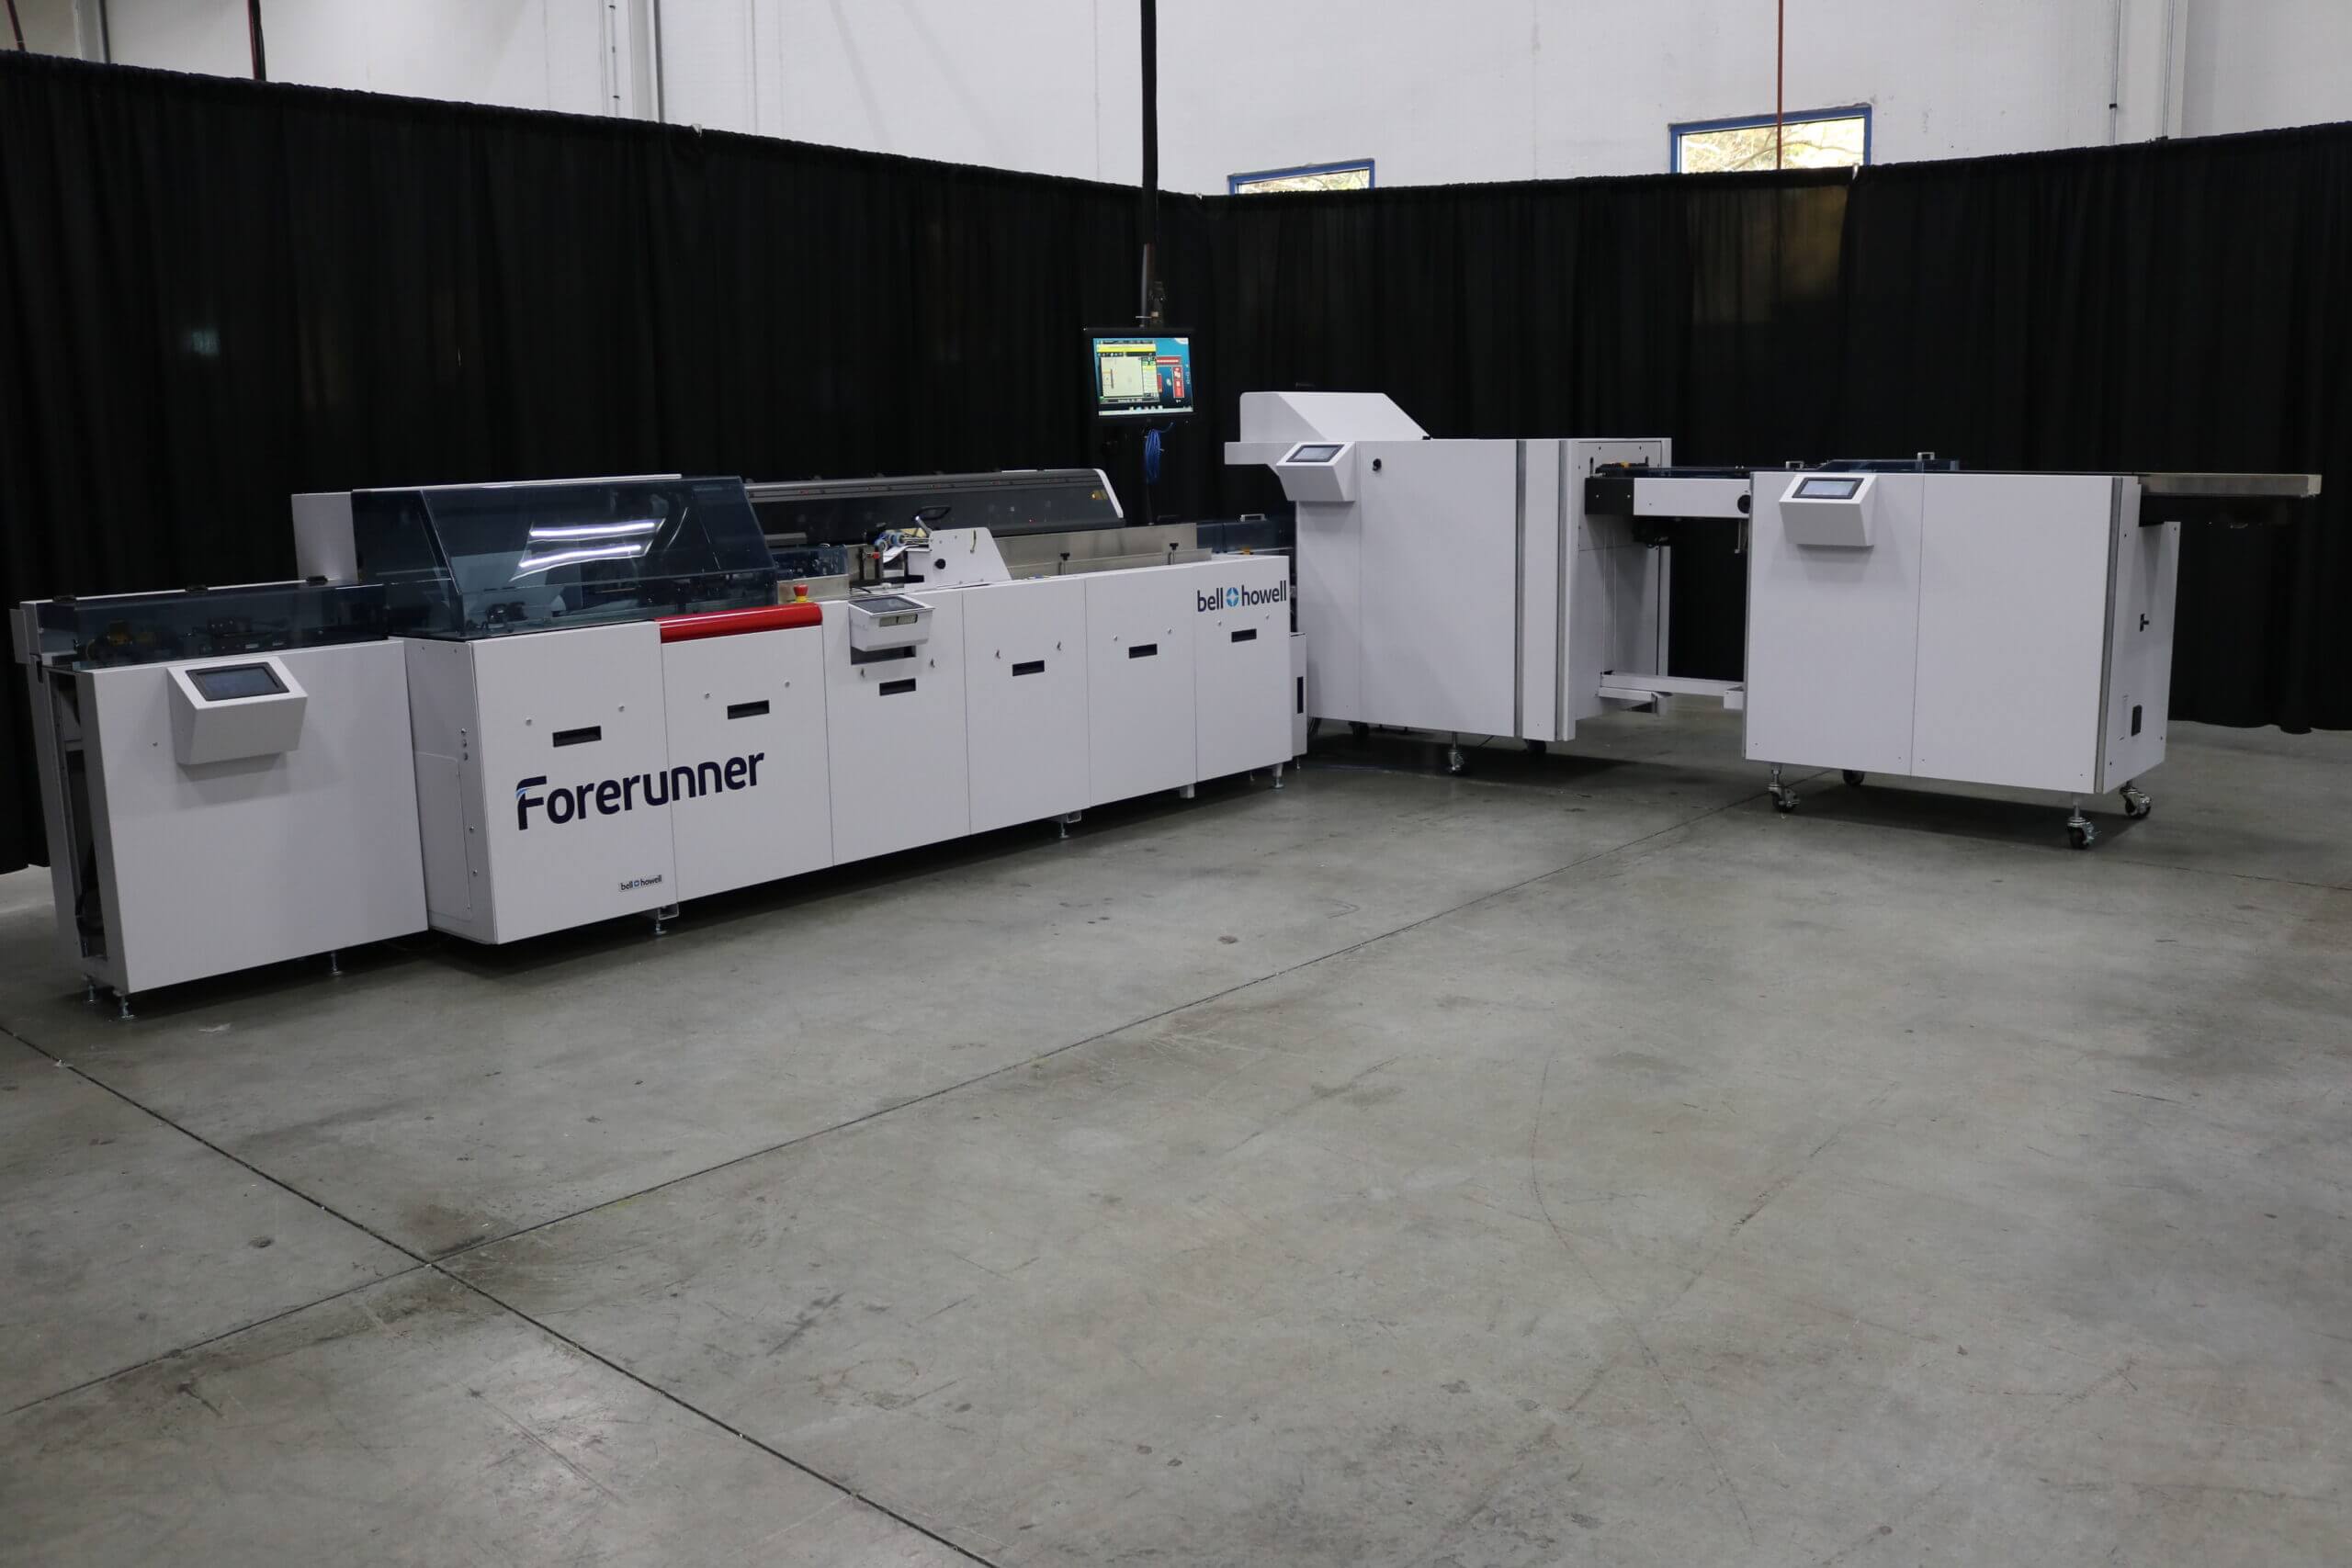 Forerunner mail production equipment